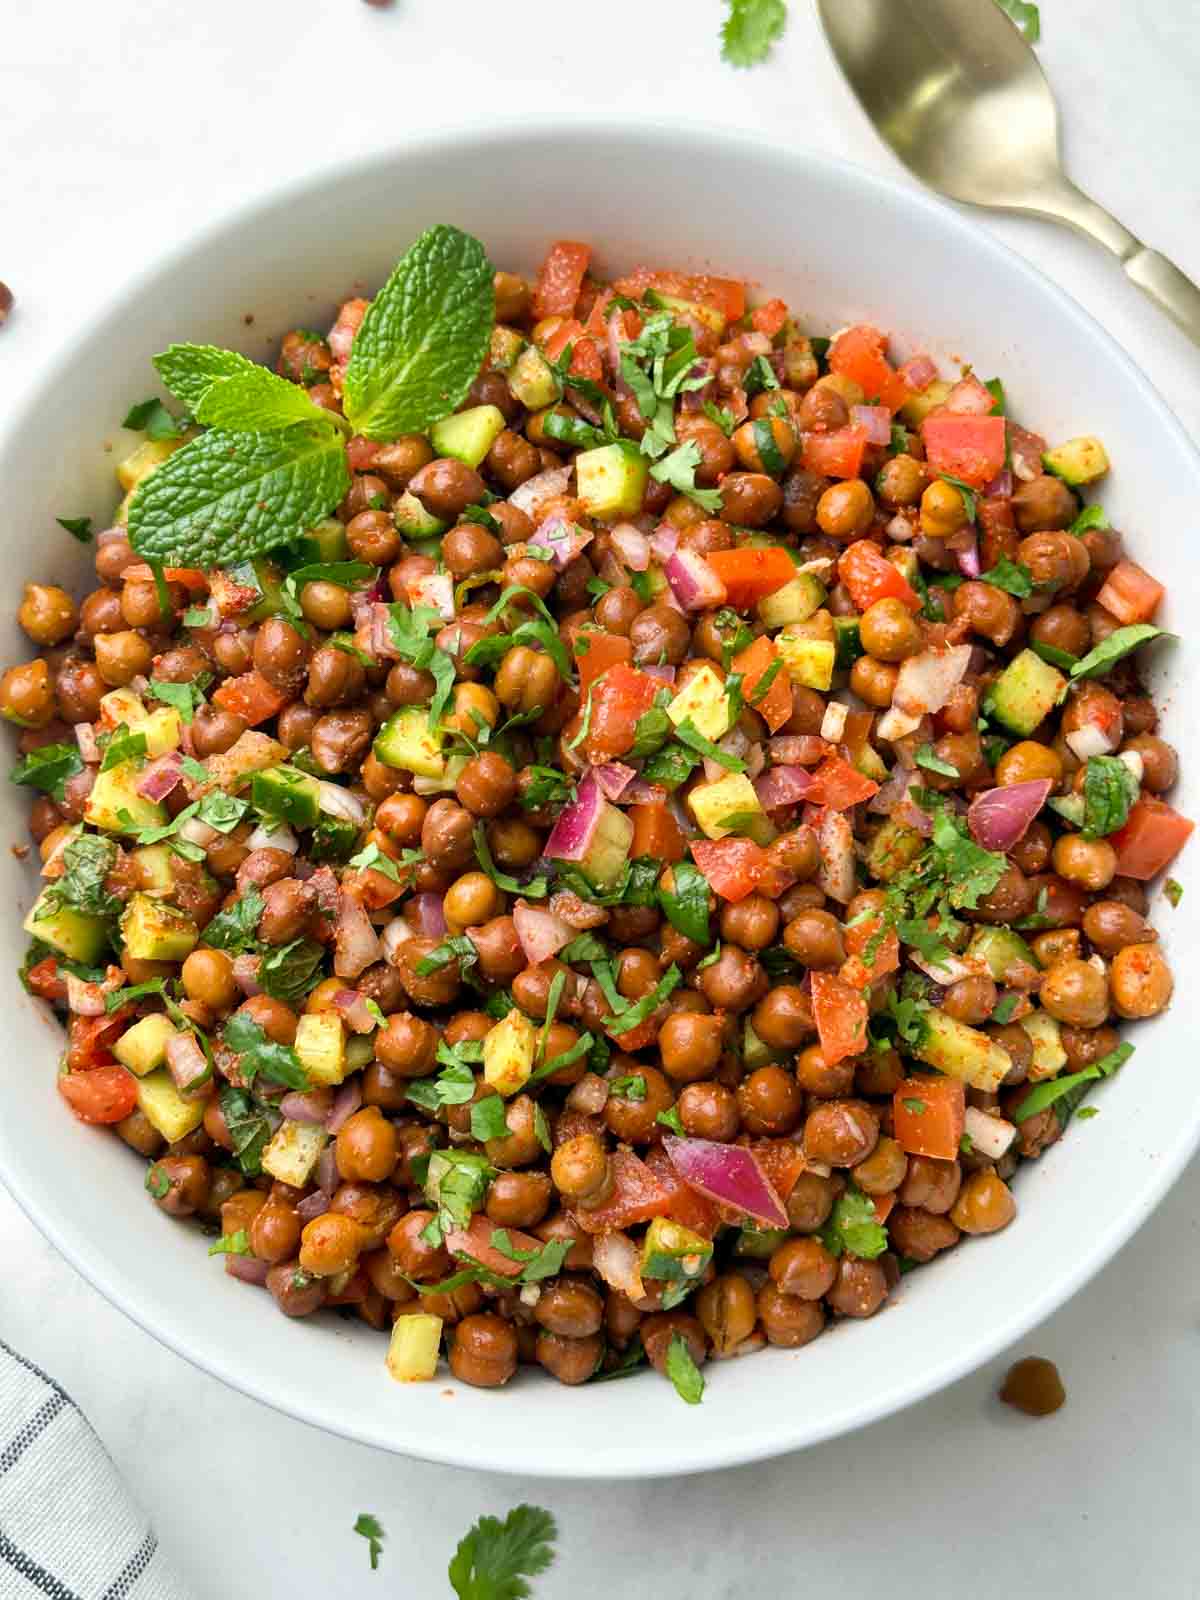 kala chana salad (black chickpeas salad) served in a bowl garnished with mint and spoon on the side